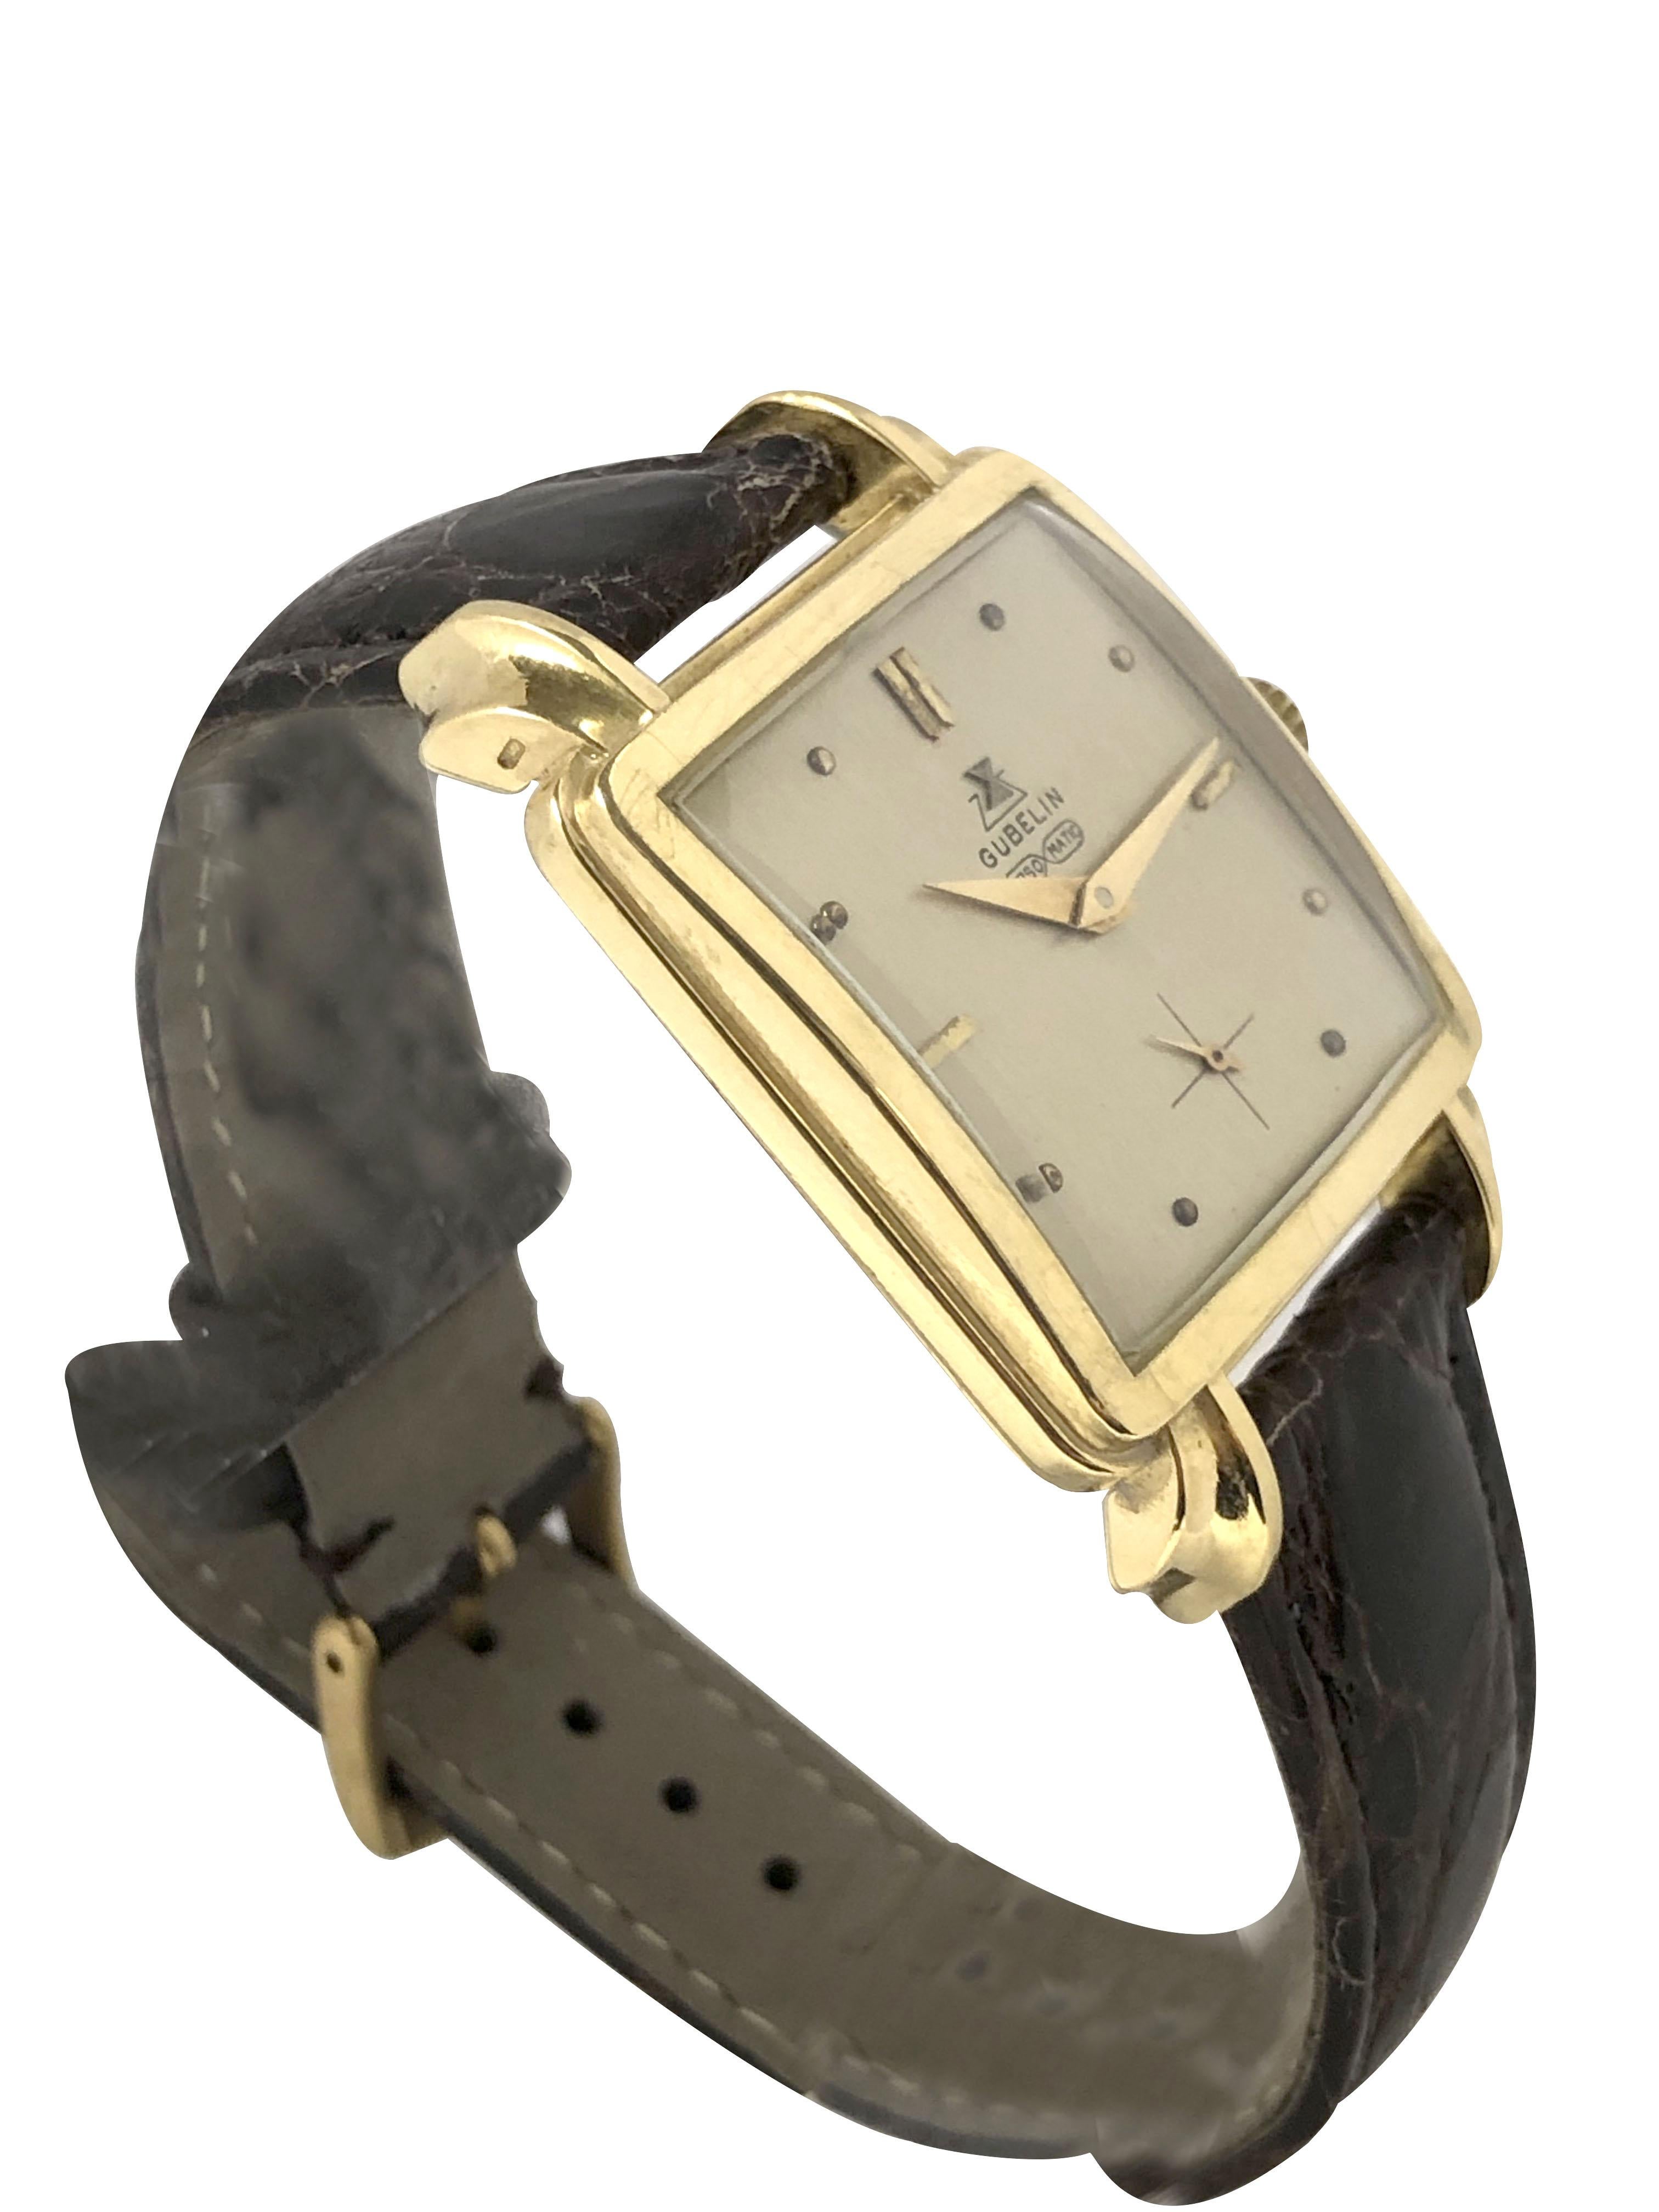 Circa 1940s Gubelin Gents Wrist watch, 45 M.M. Lug end to end X 31 M.M. 2 Piece 18K Yellow Gold stepped case with Fancy Flared Lugs. 17 Jewel Mechanical, Manual wind Nickle Lever movement. Silver Satin Dial with raised Gold markers and a sub seconds